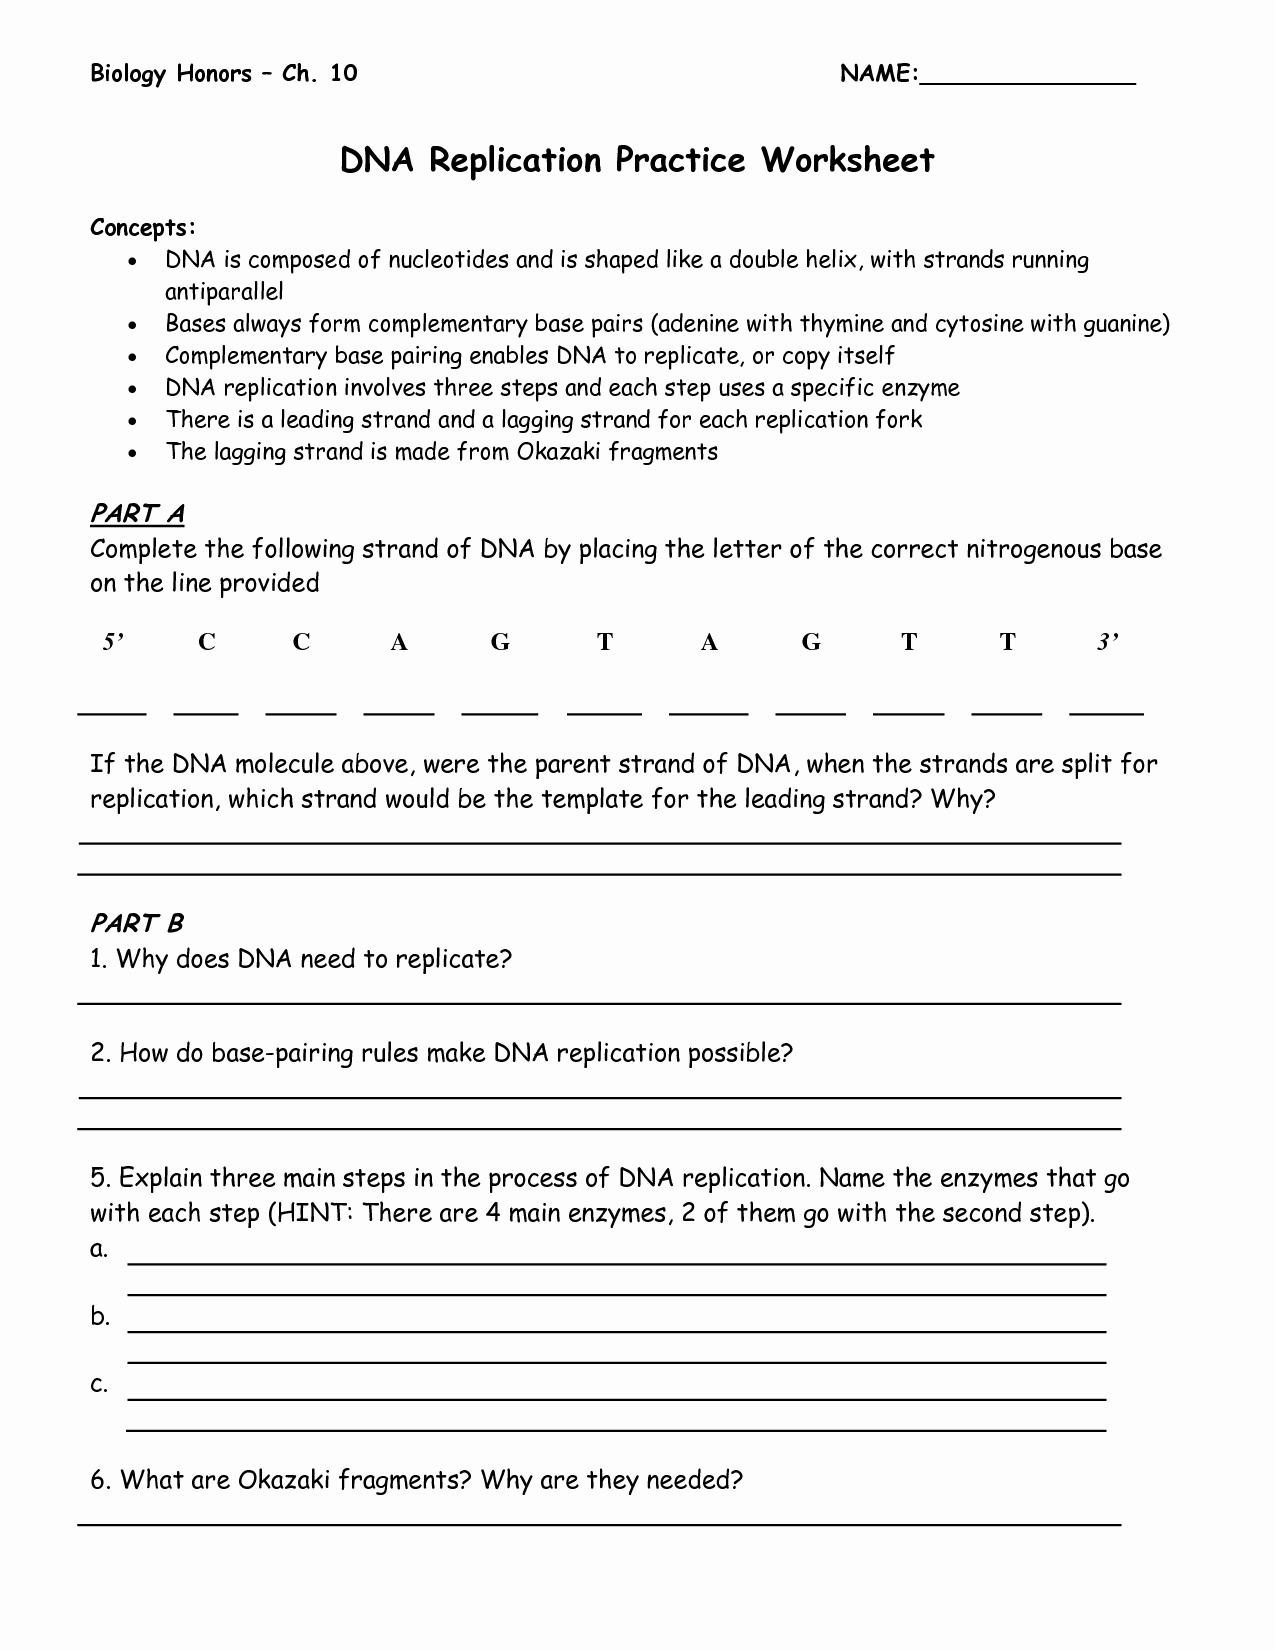 Dna and Replication Worksheet Answers Awesome 19 Best Of Dna Replication Structure Worksheet and